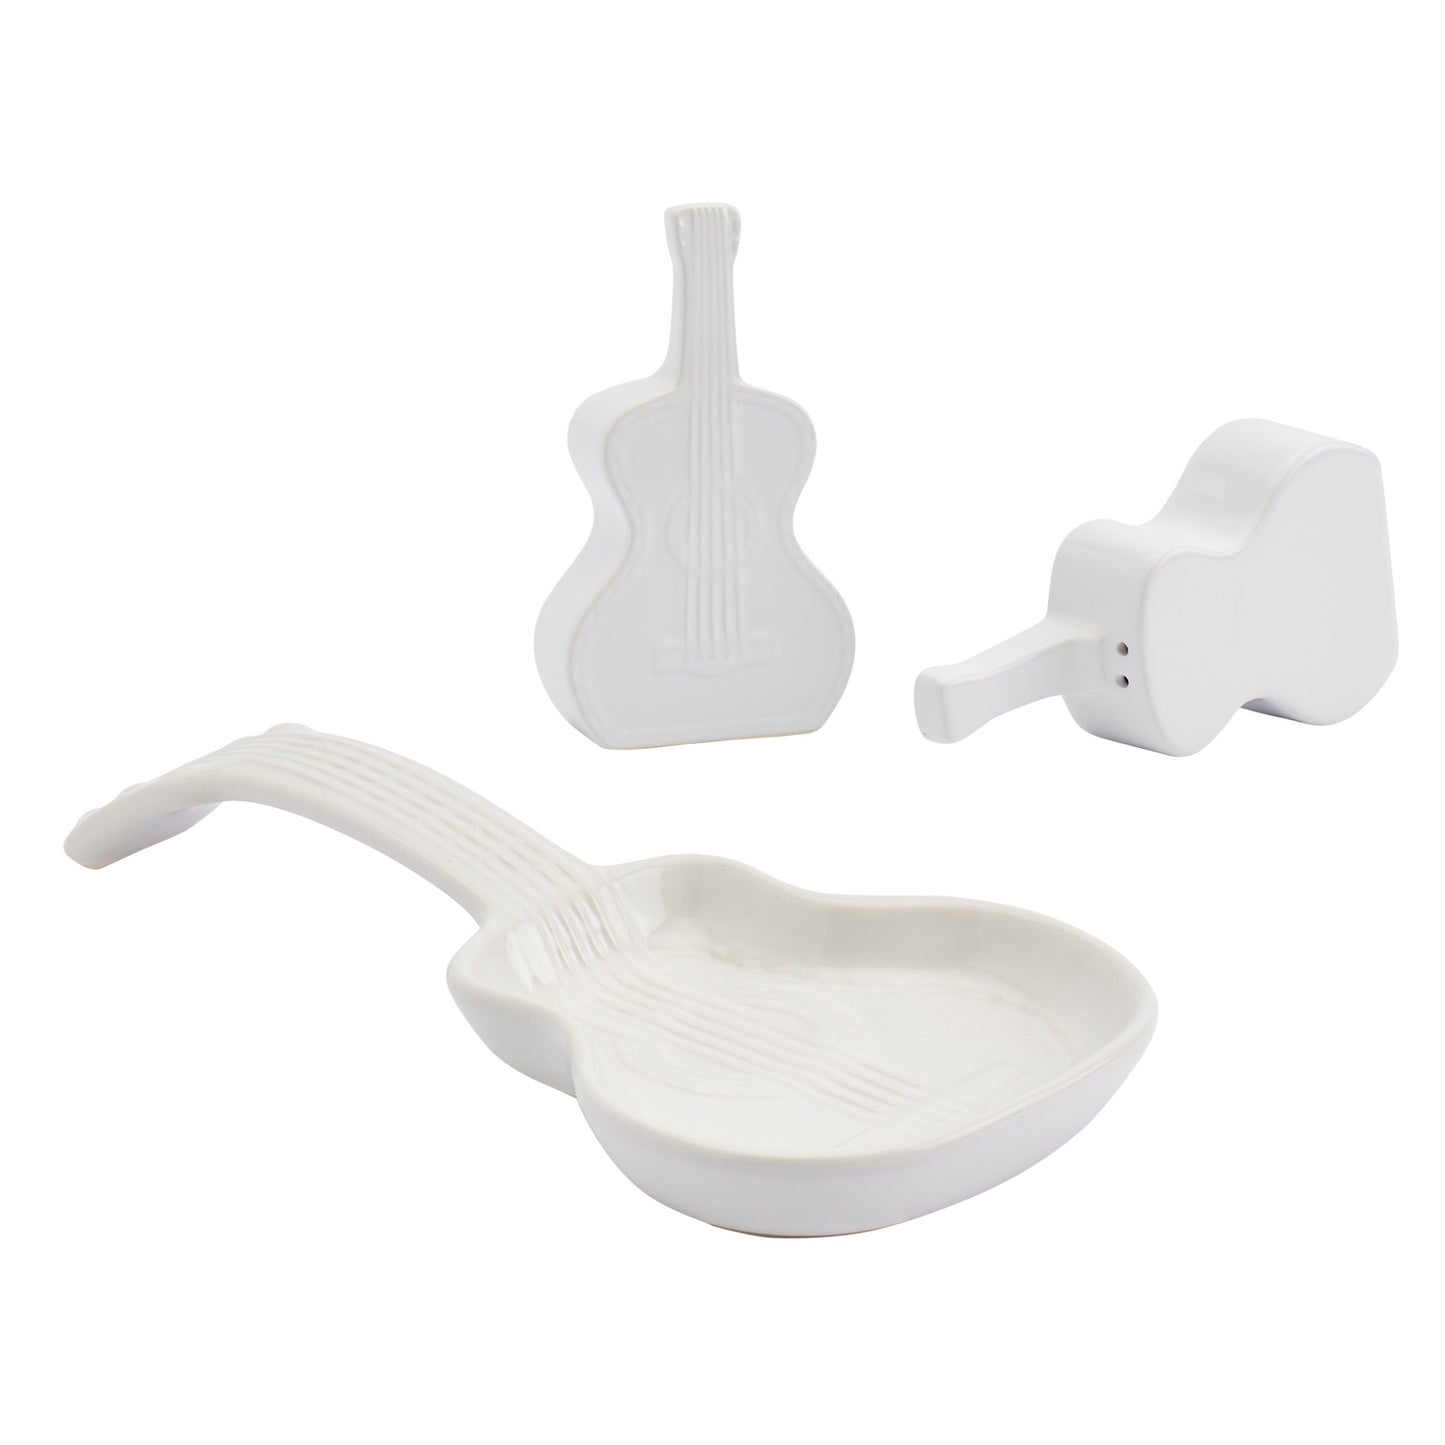 Dolly Guitar 3pc. Salt & Pepper Shakers with Spoon Rest